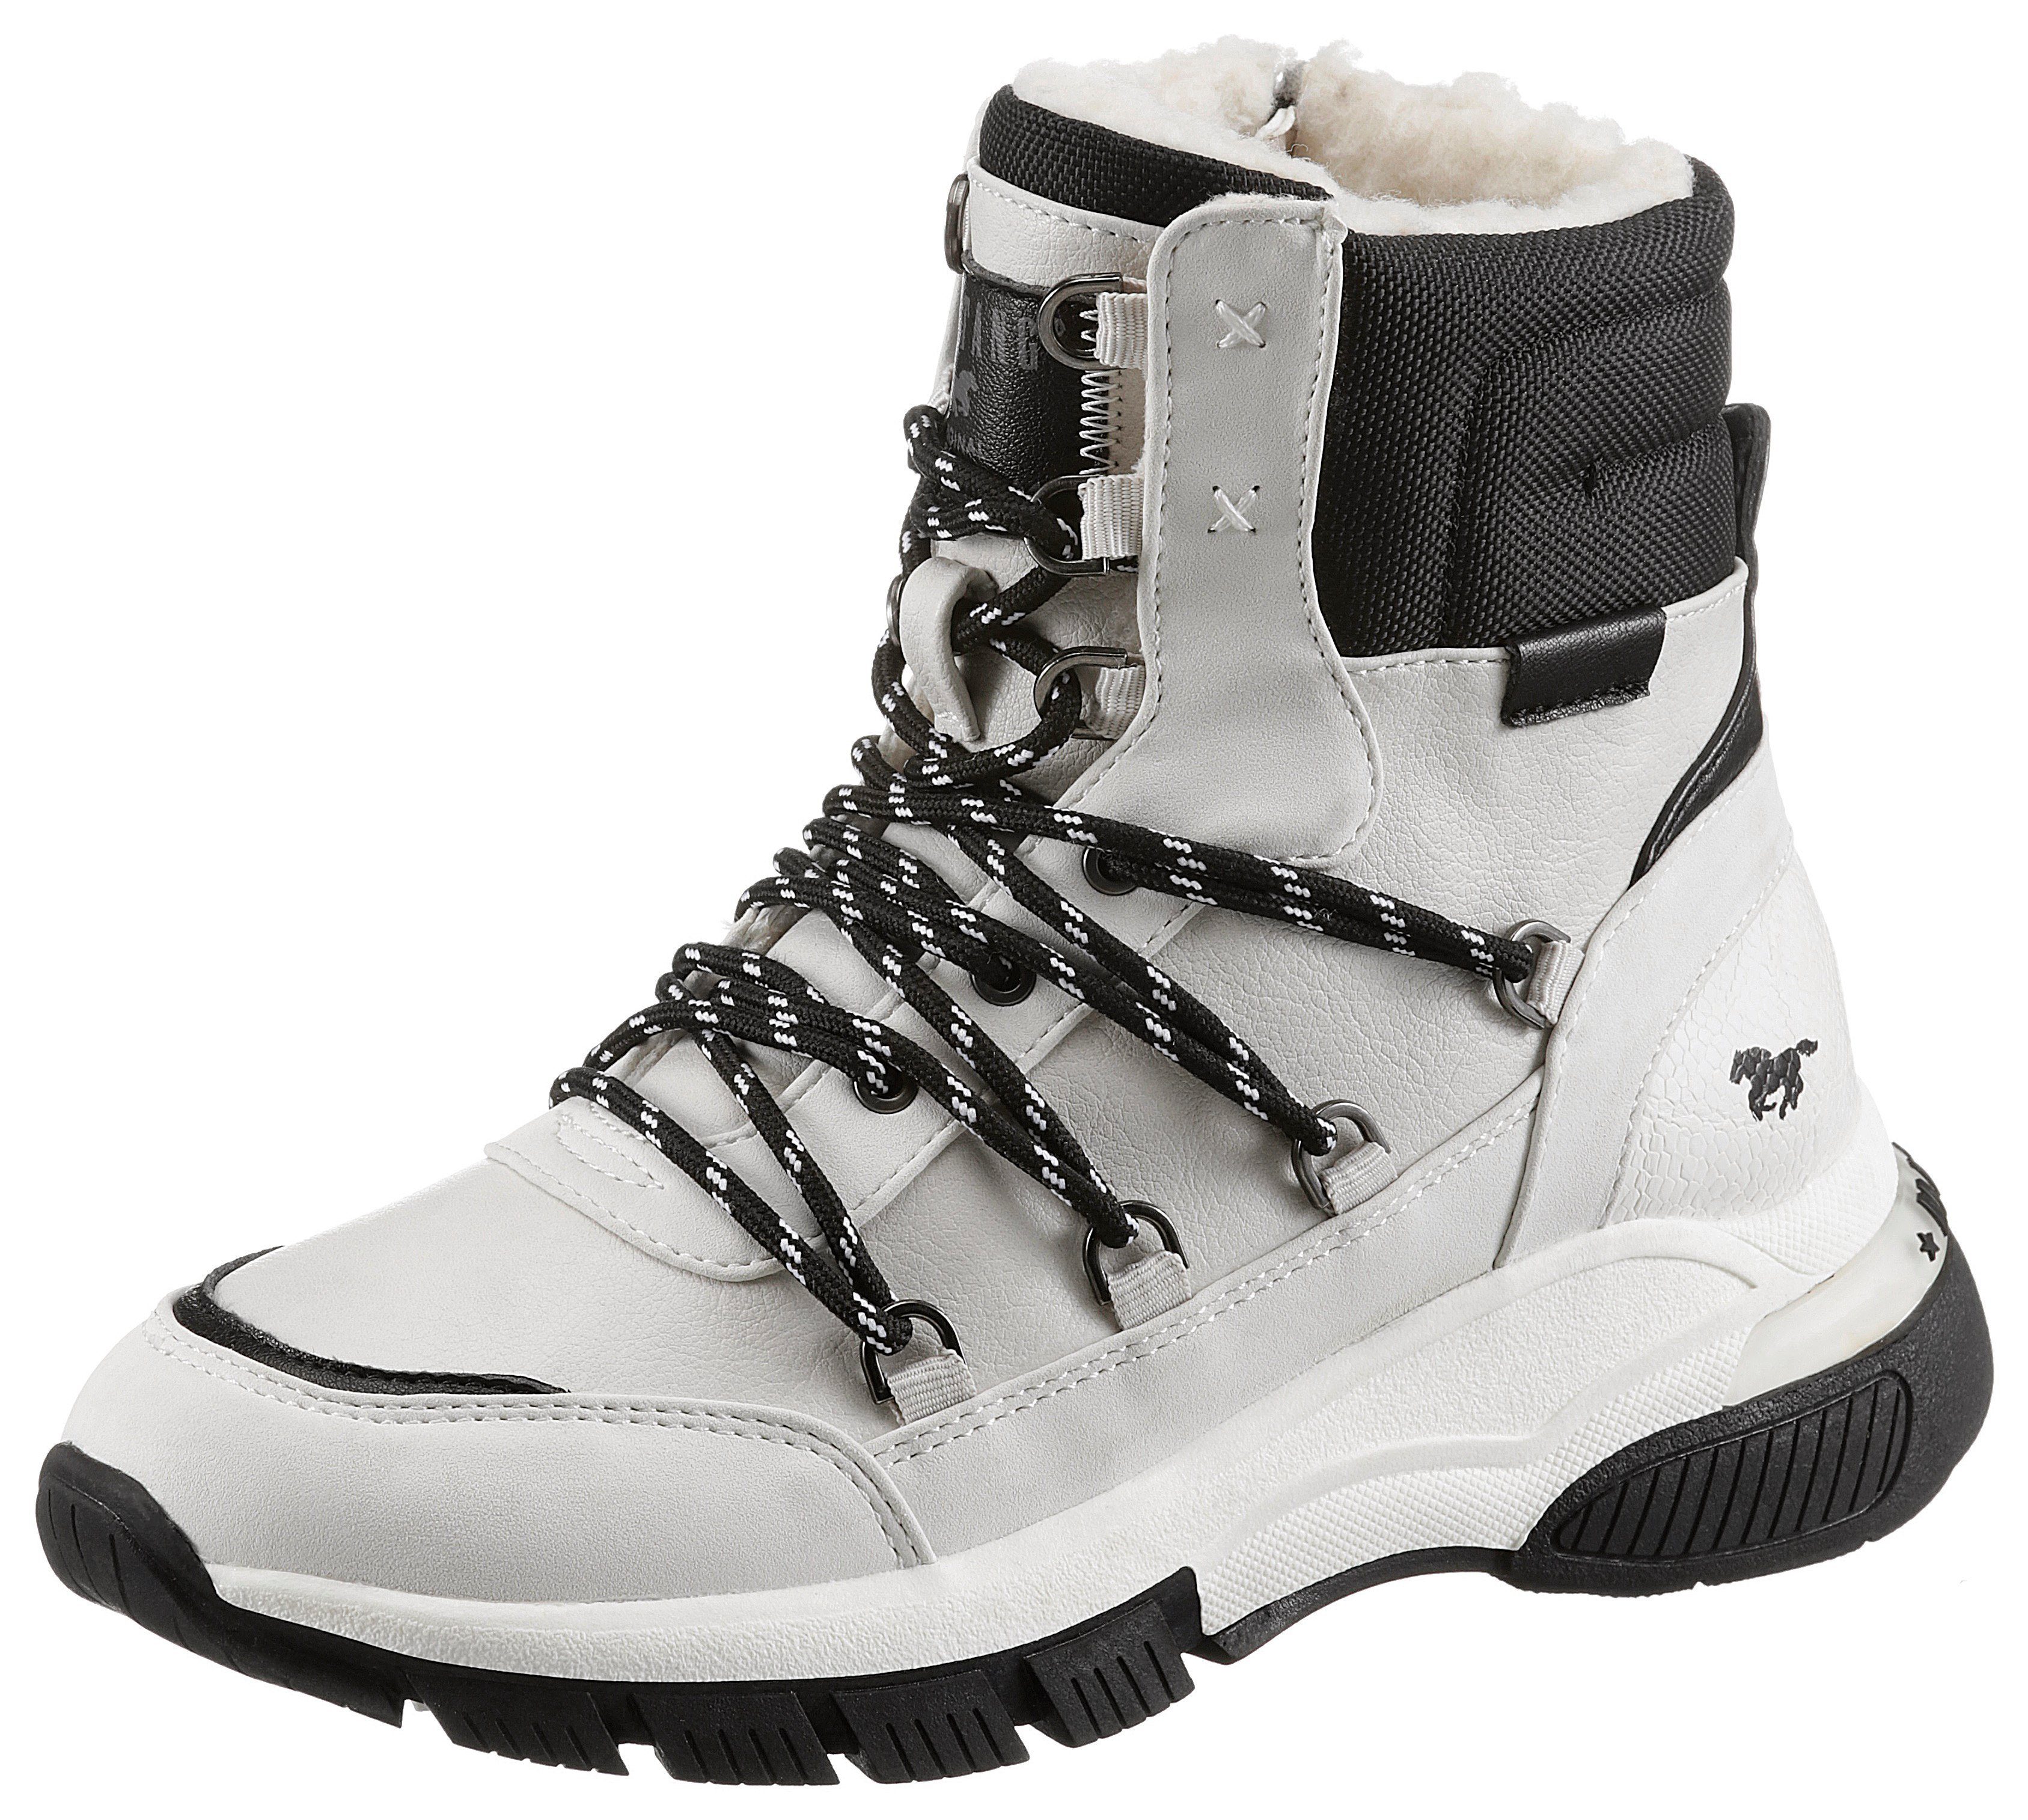 Mustang Shoes Winterboots mit Laufsohle offwhite zweifarbiger